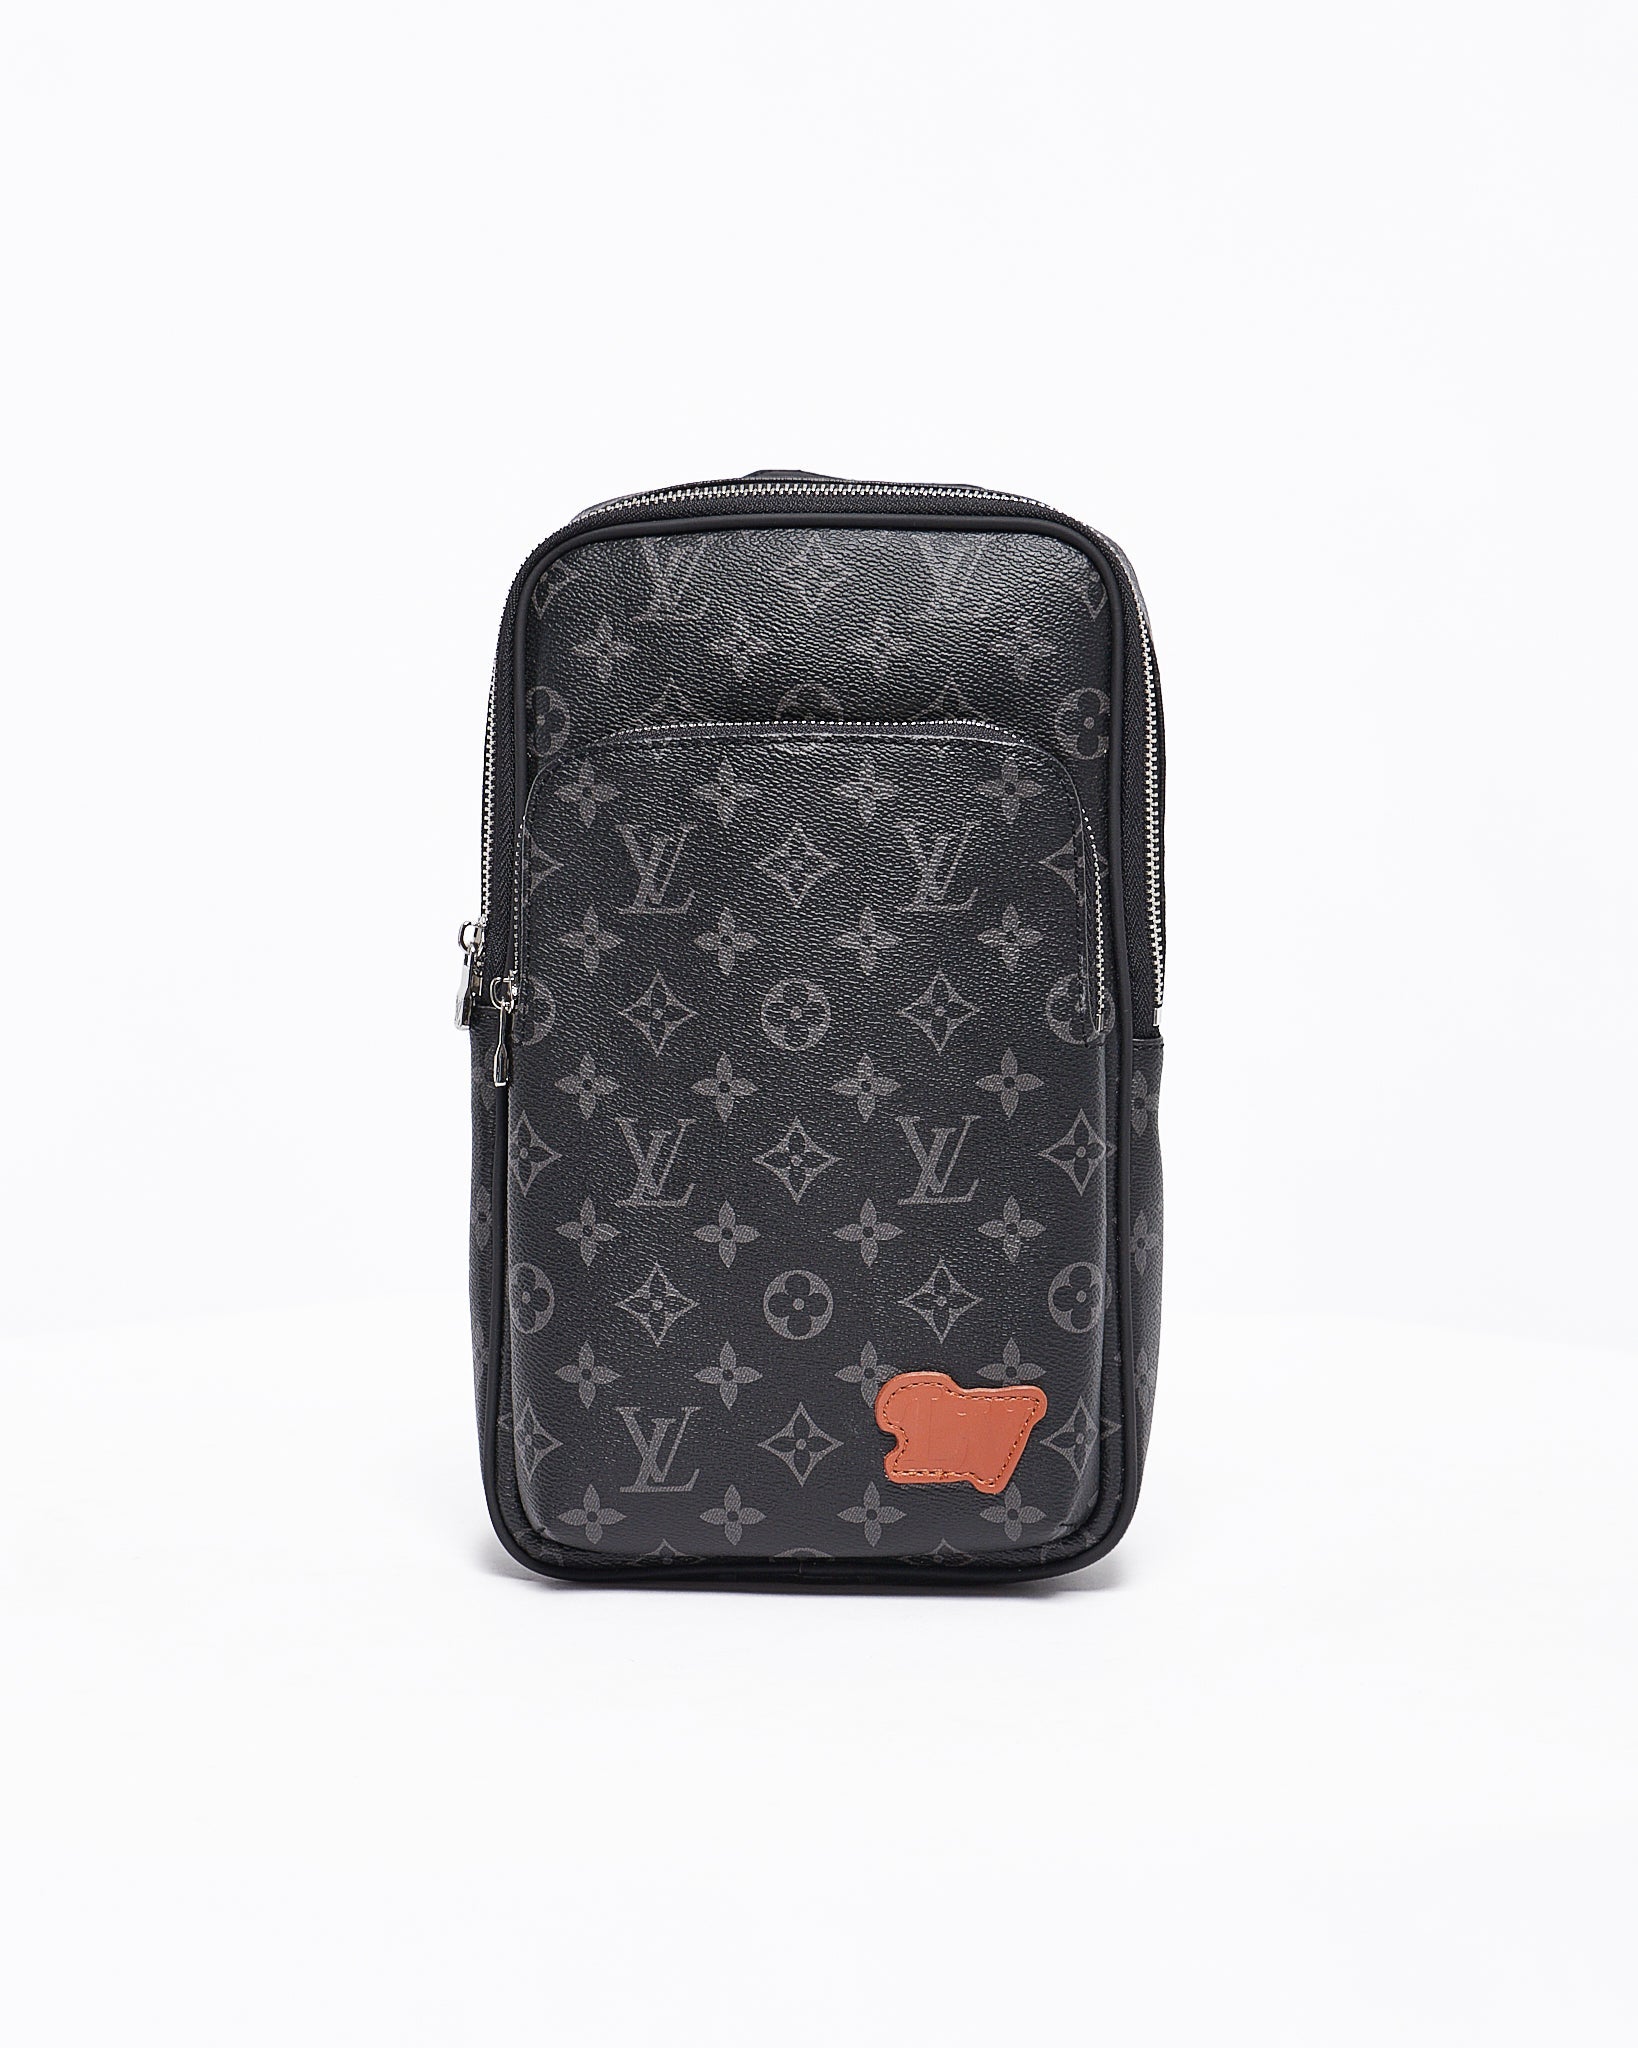 lv sling bag outfit